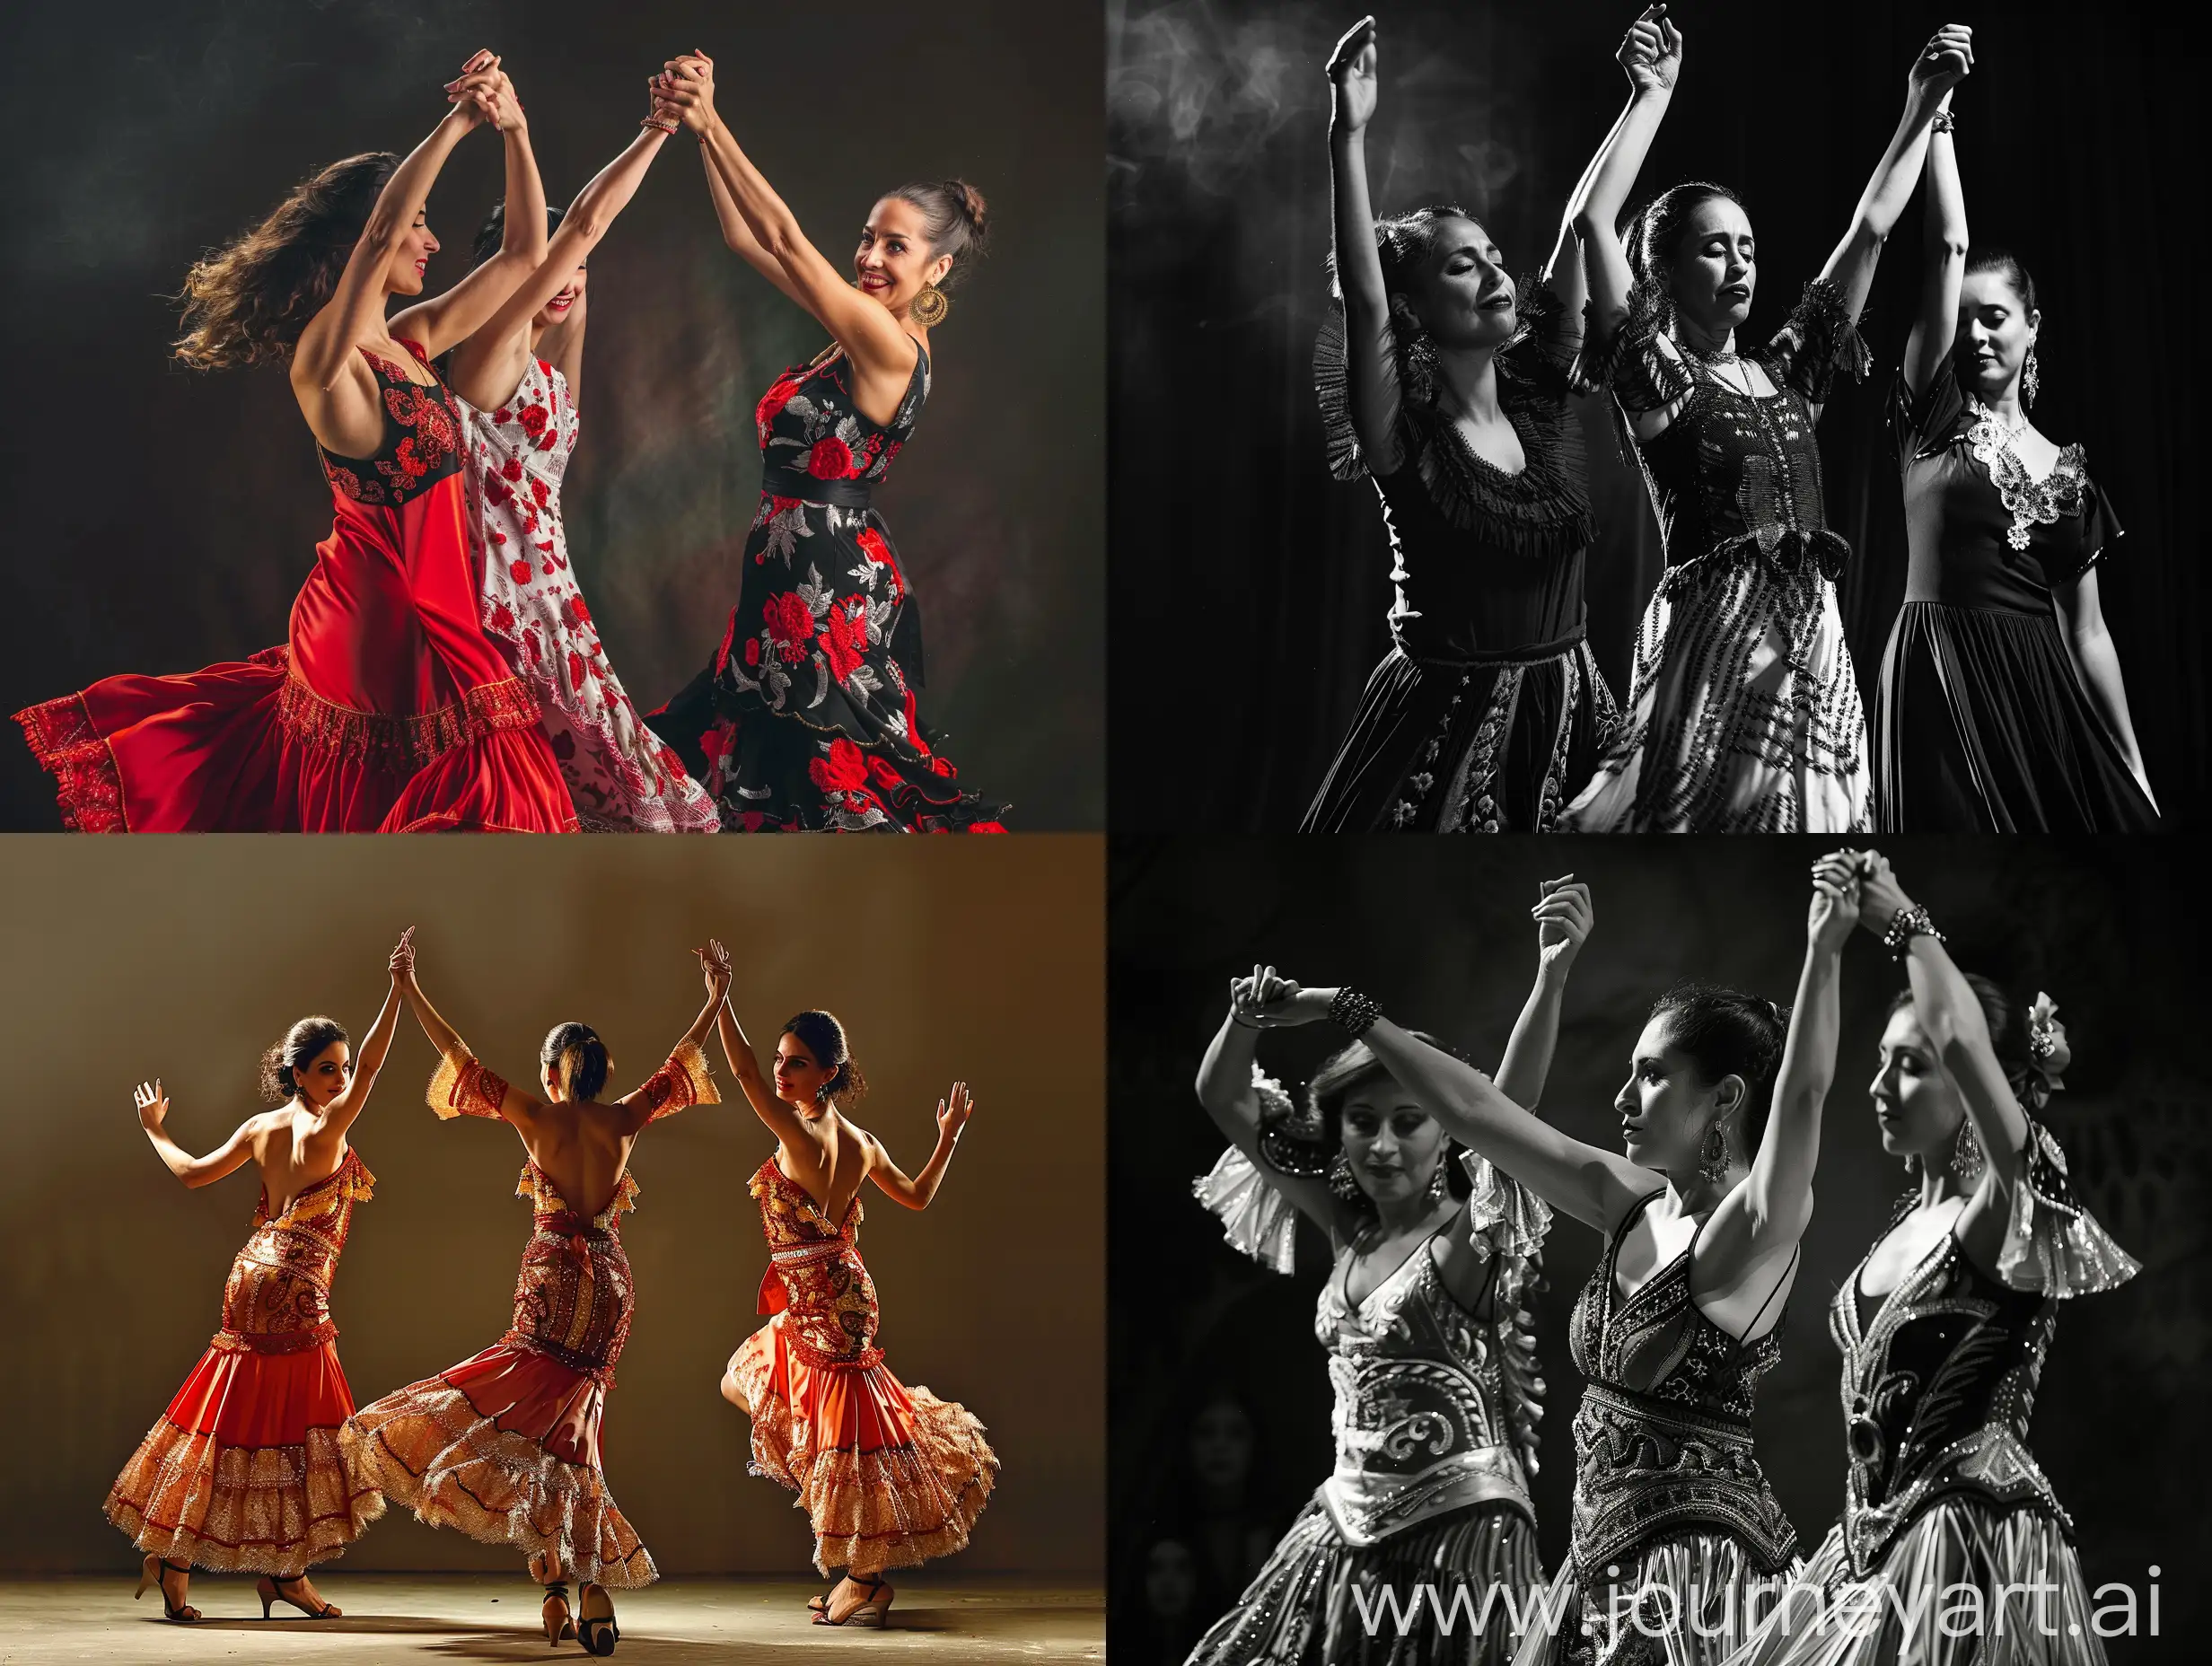 Three women dancing flamenco by holding one hand each up in the air